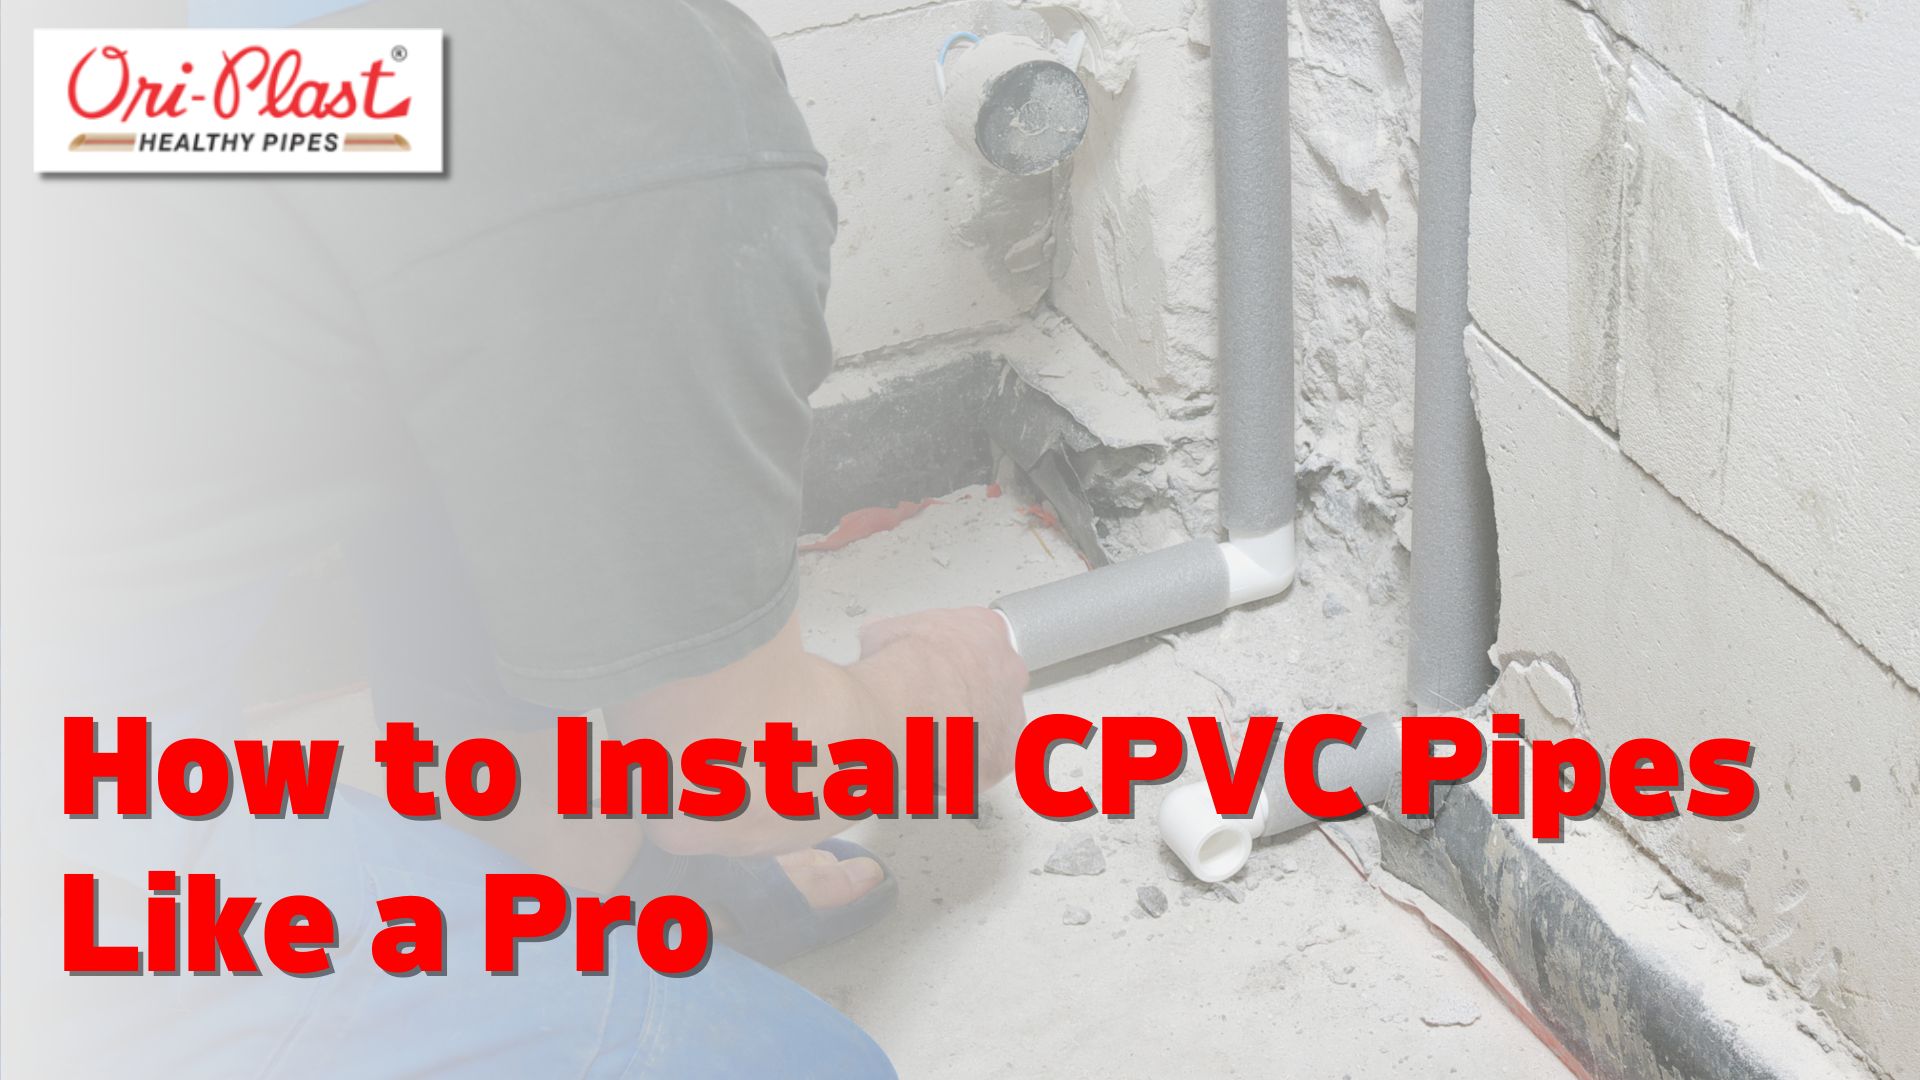 How to Install CPVC Pipes Like a Pro